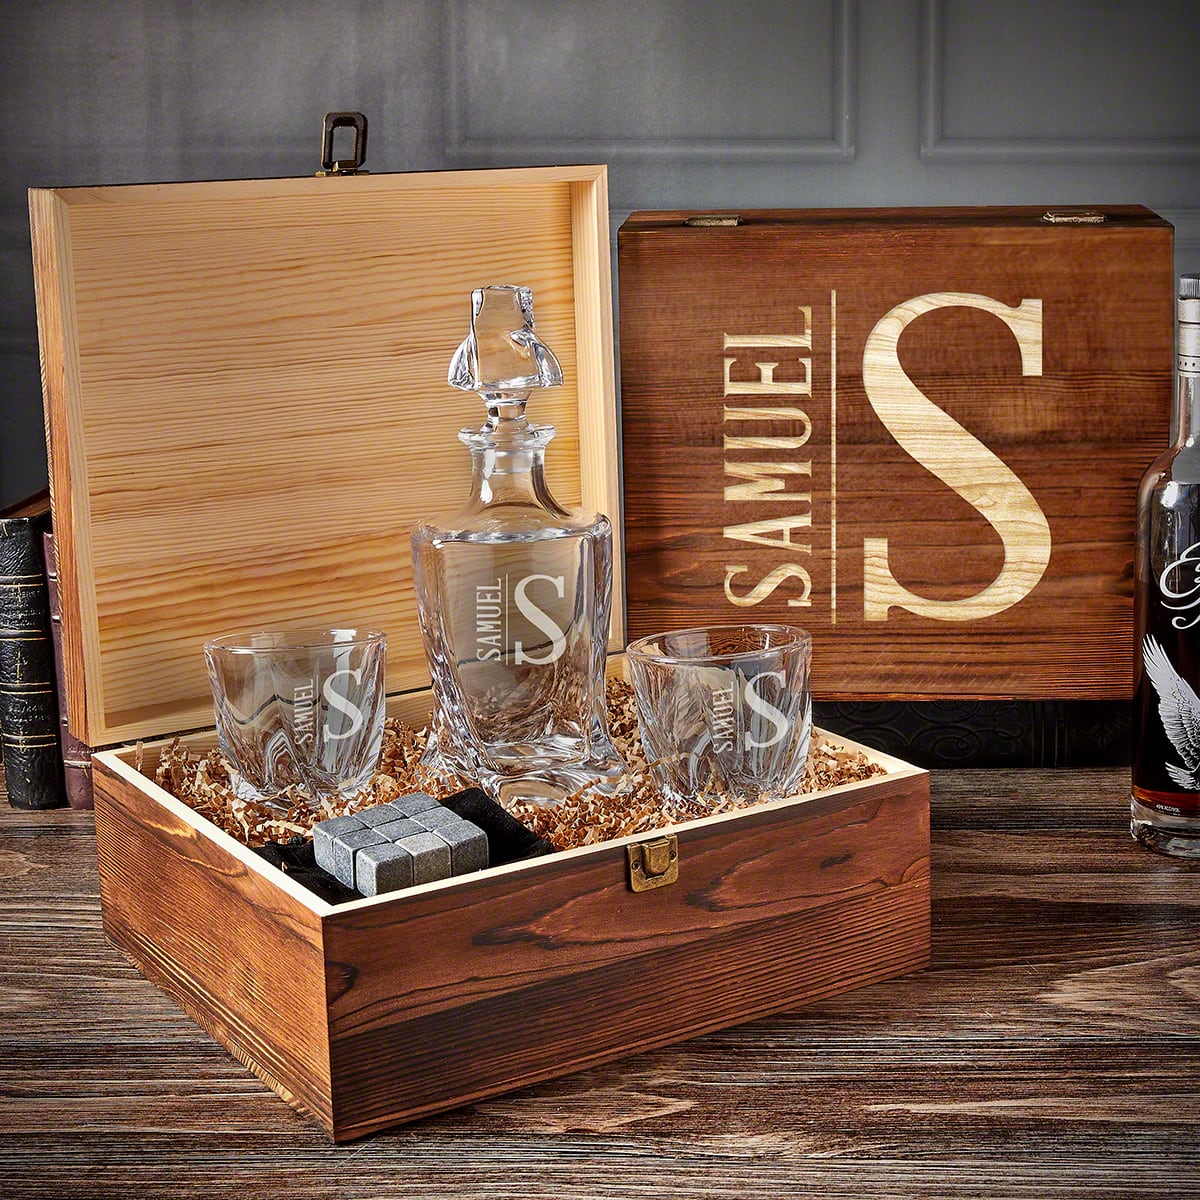 Engraved Vicente Twist Whiskey Decanter Set with Glasses - 5pc Gift Boxed